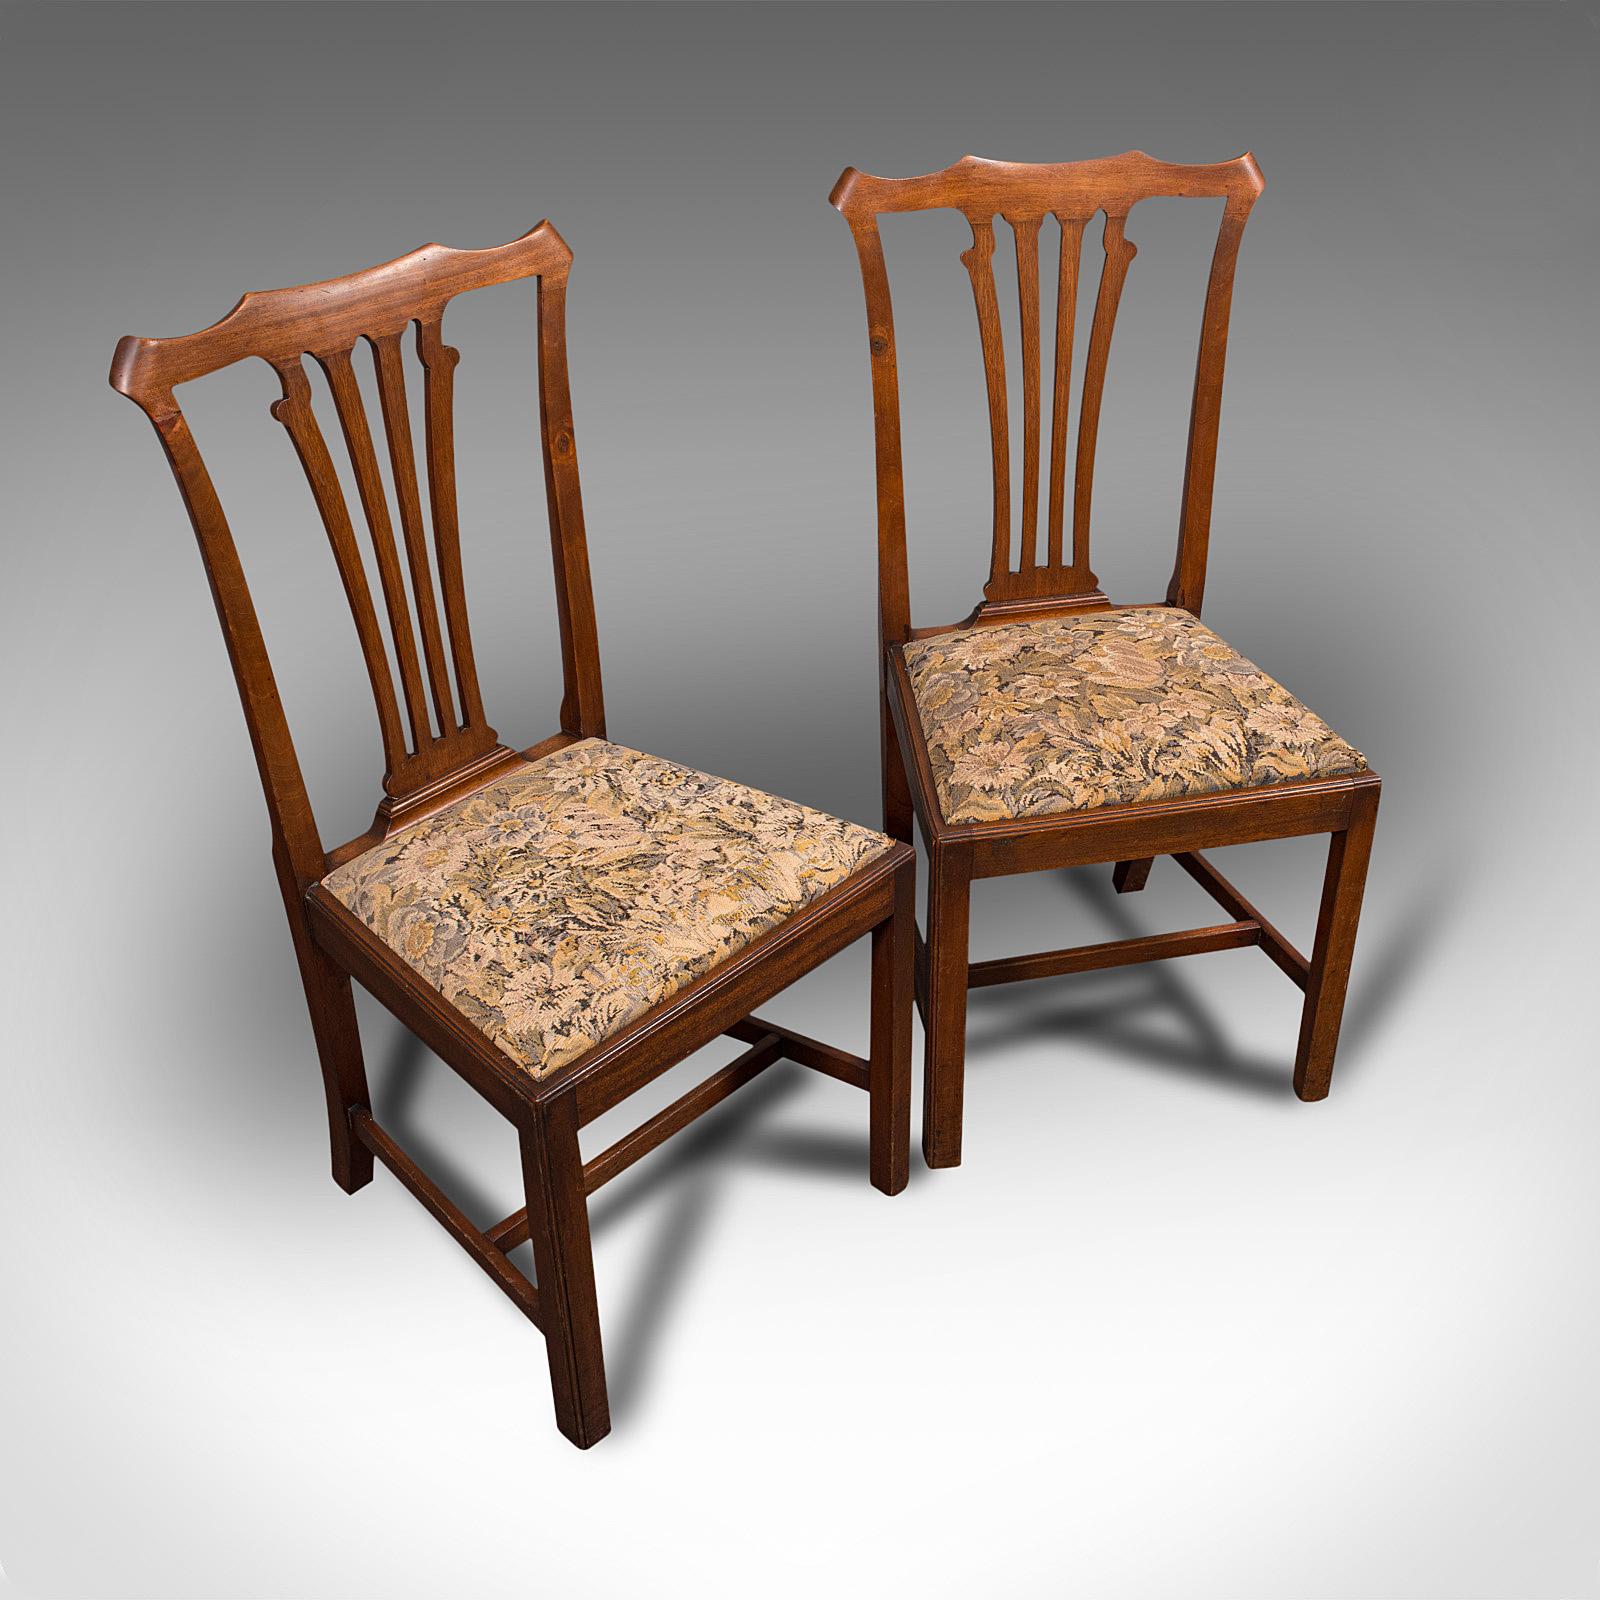 Pair of Antique Side Chairs, Mahogany, Hall, Dining Seat, Victorian, Circa 1900 1